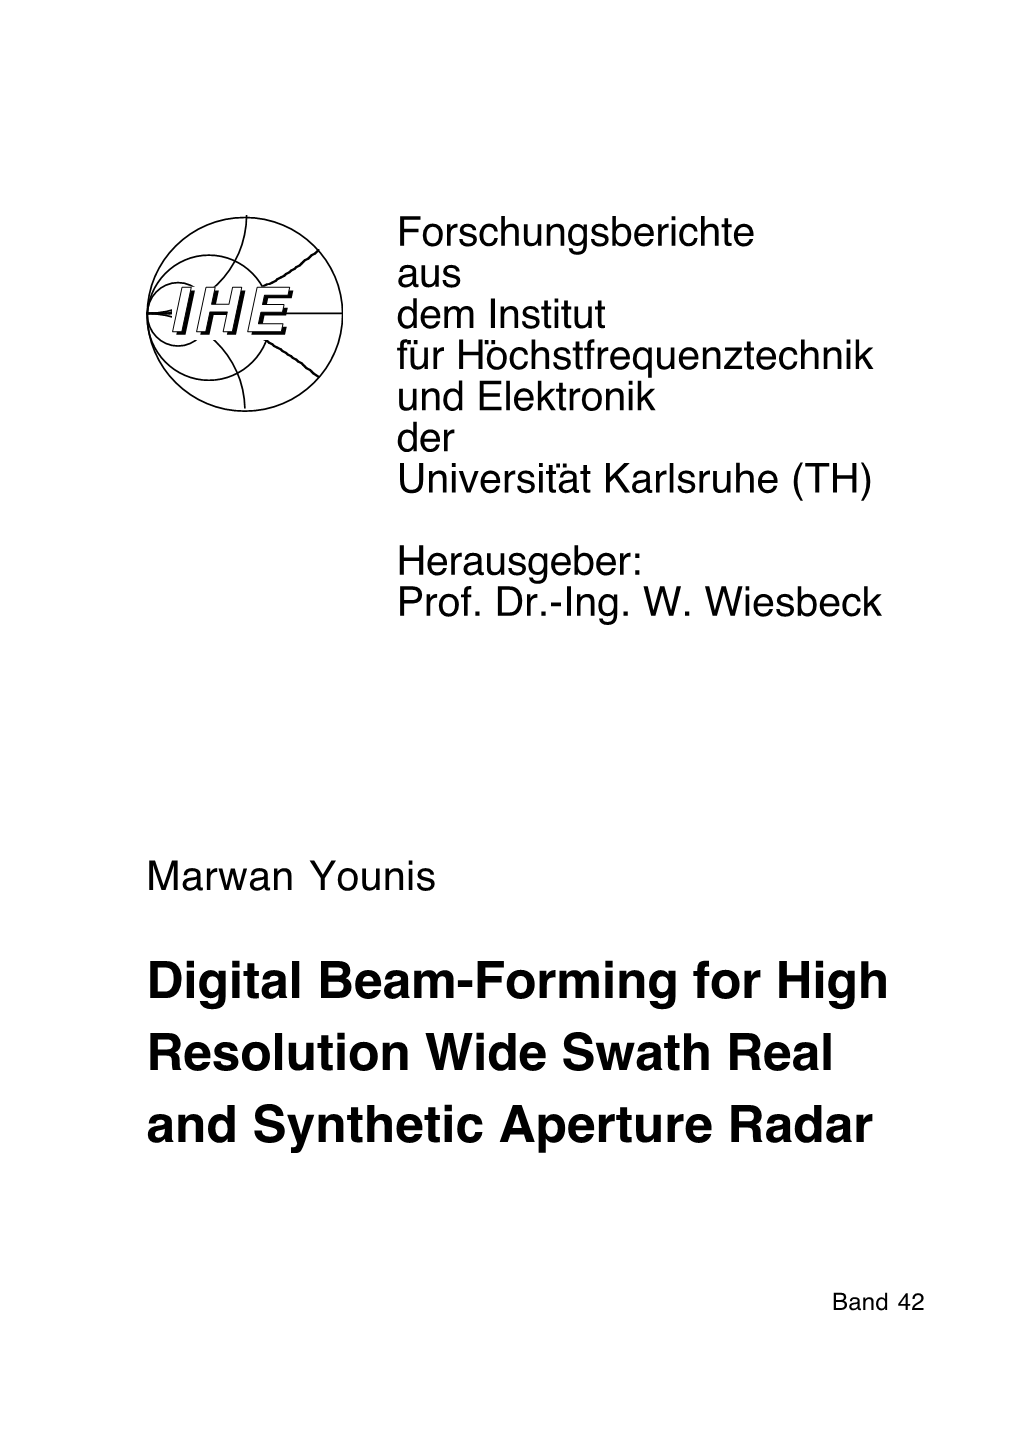 Digital Beam-Forming for High Resolution Wide Swath Real and Synthetic Aperture Radar